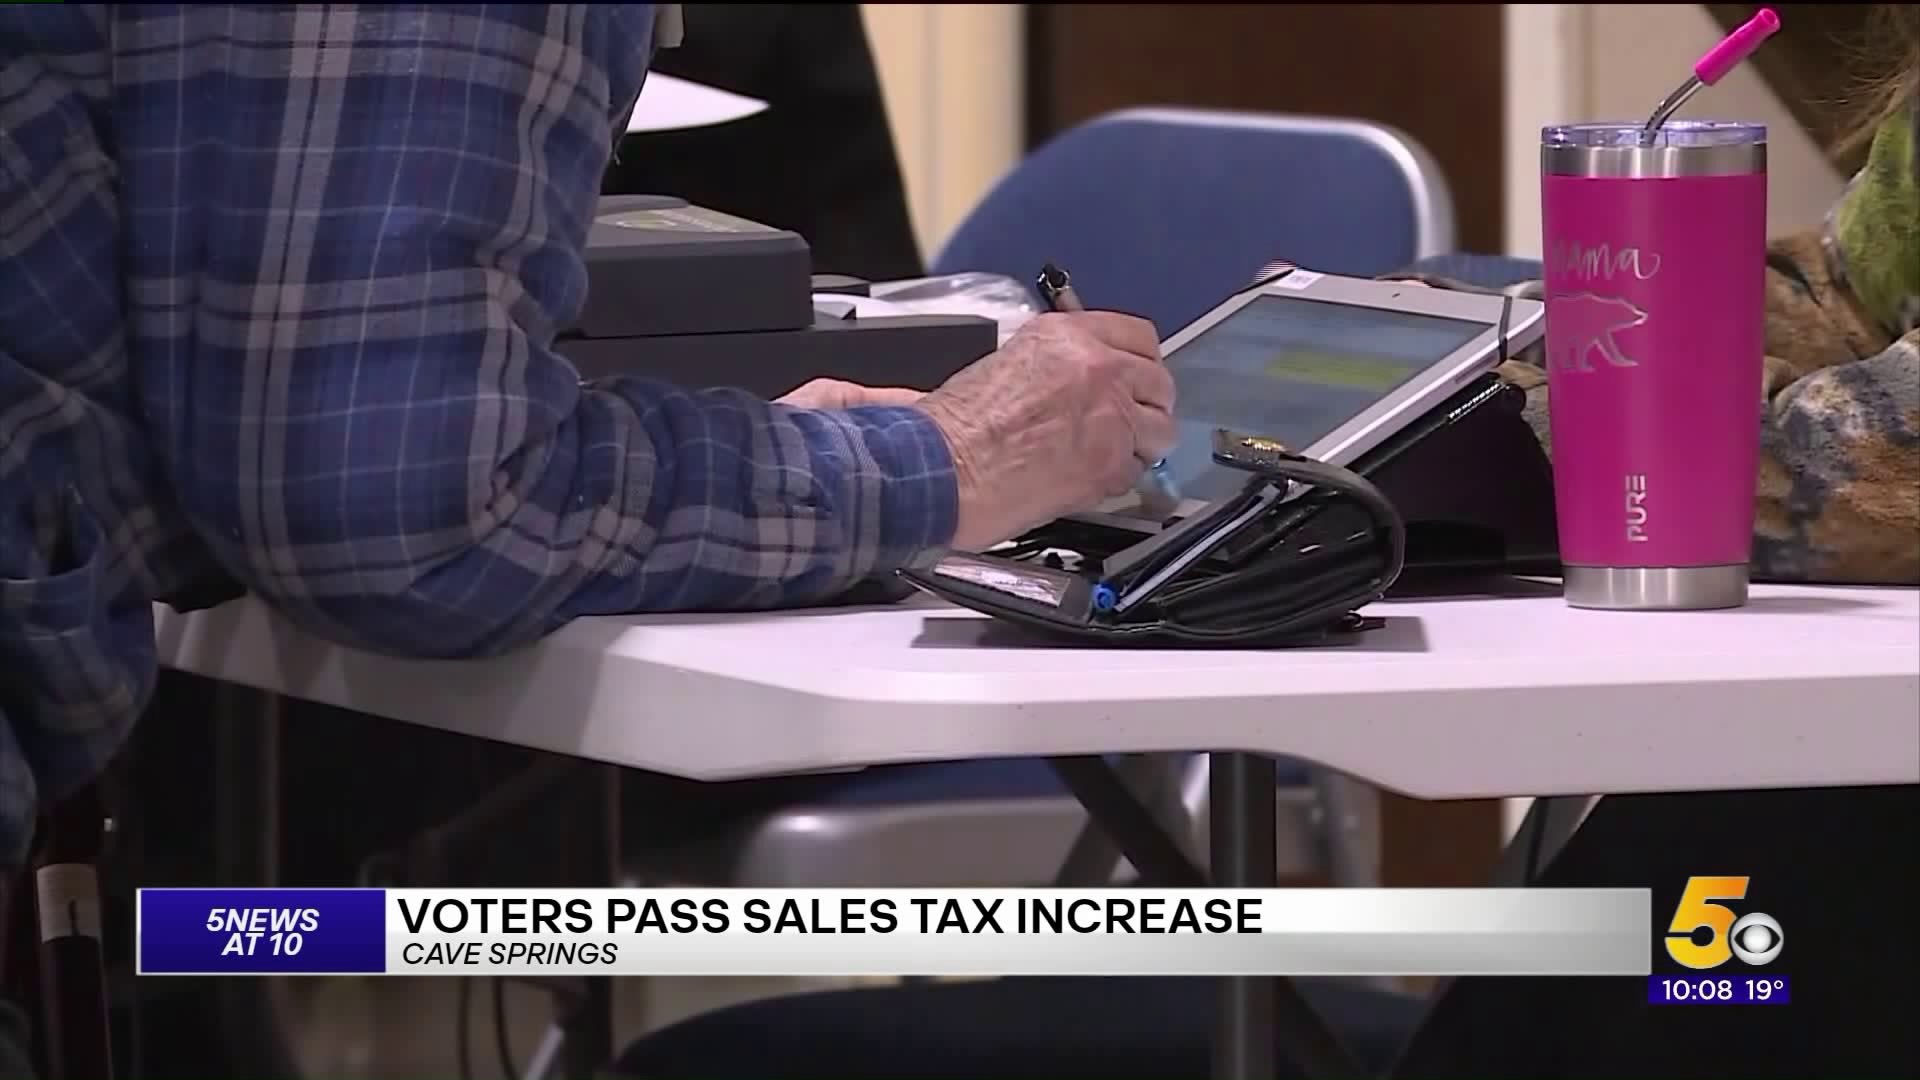 Cave Springs Voters Pass Sales Tax Increase 5newsonline Com